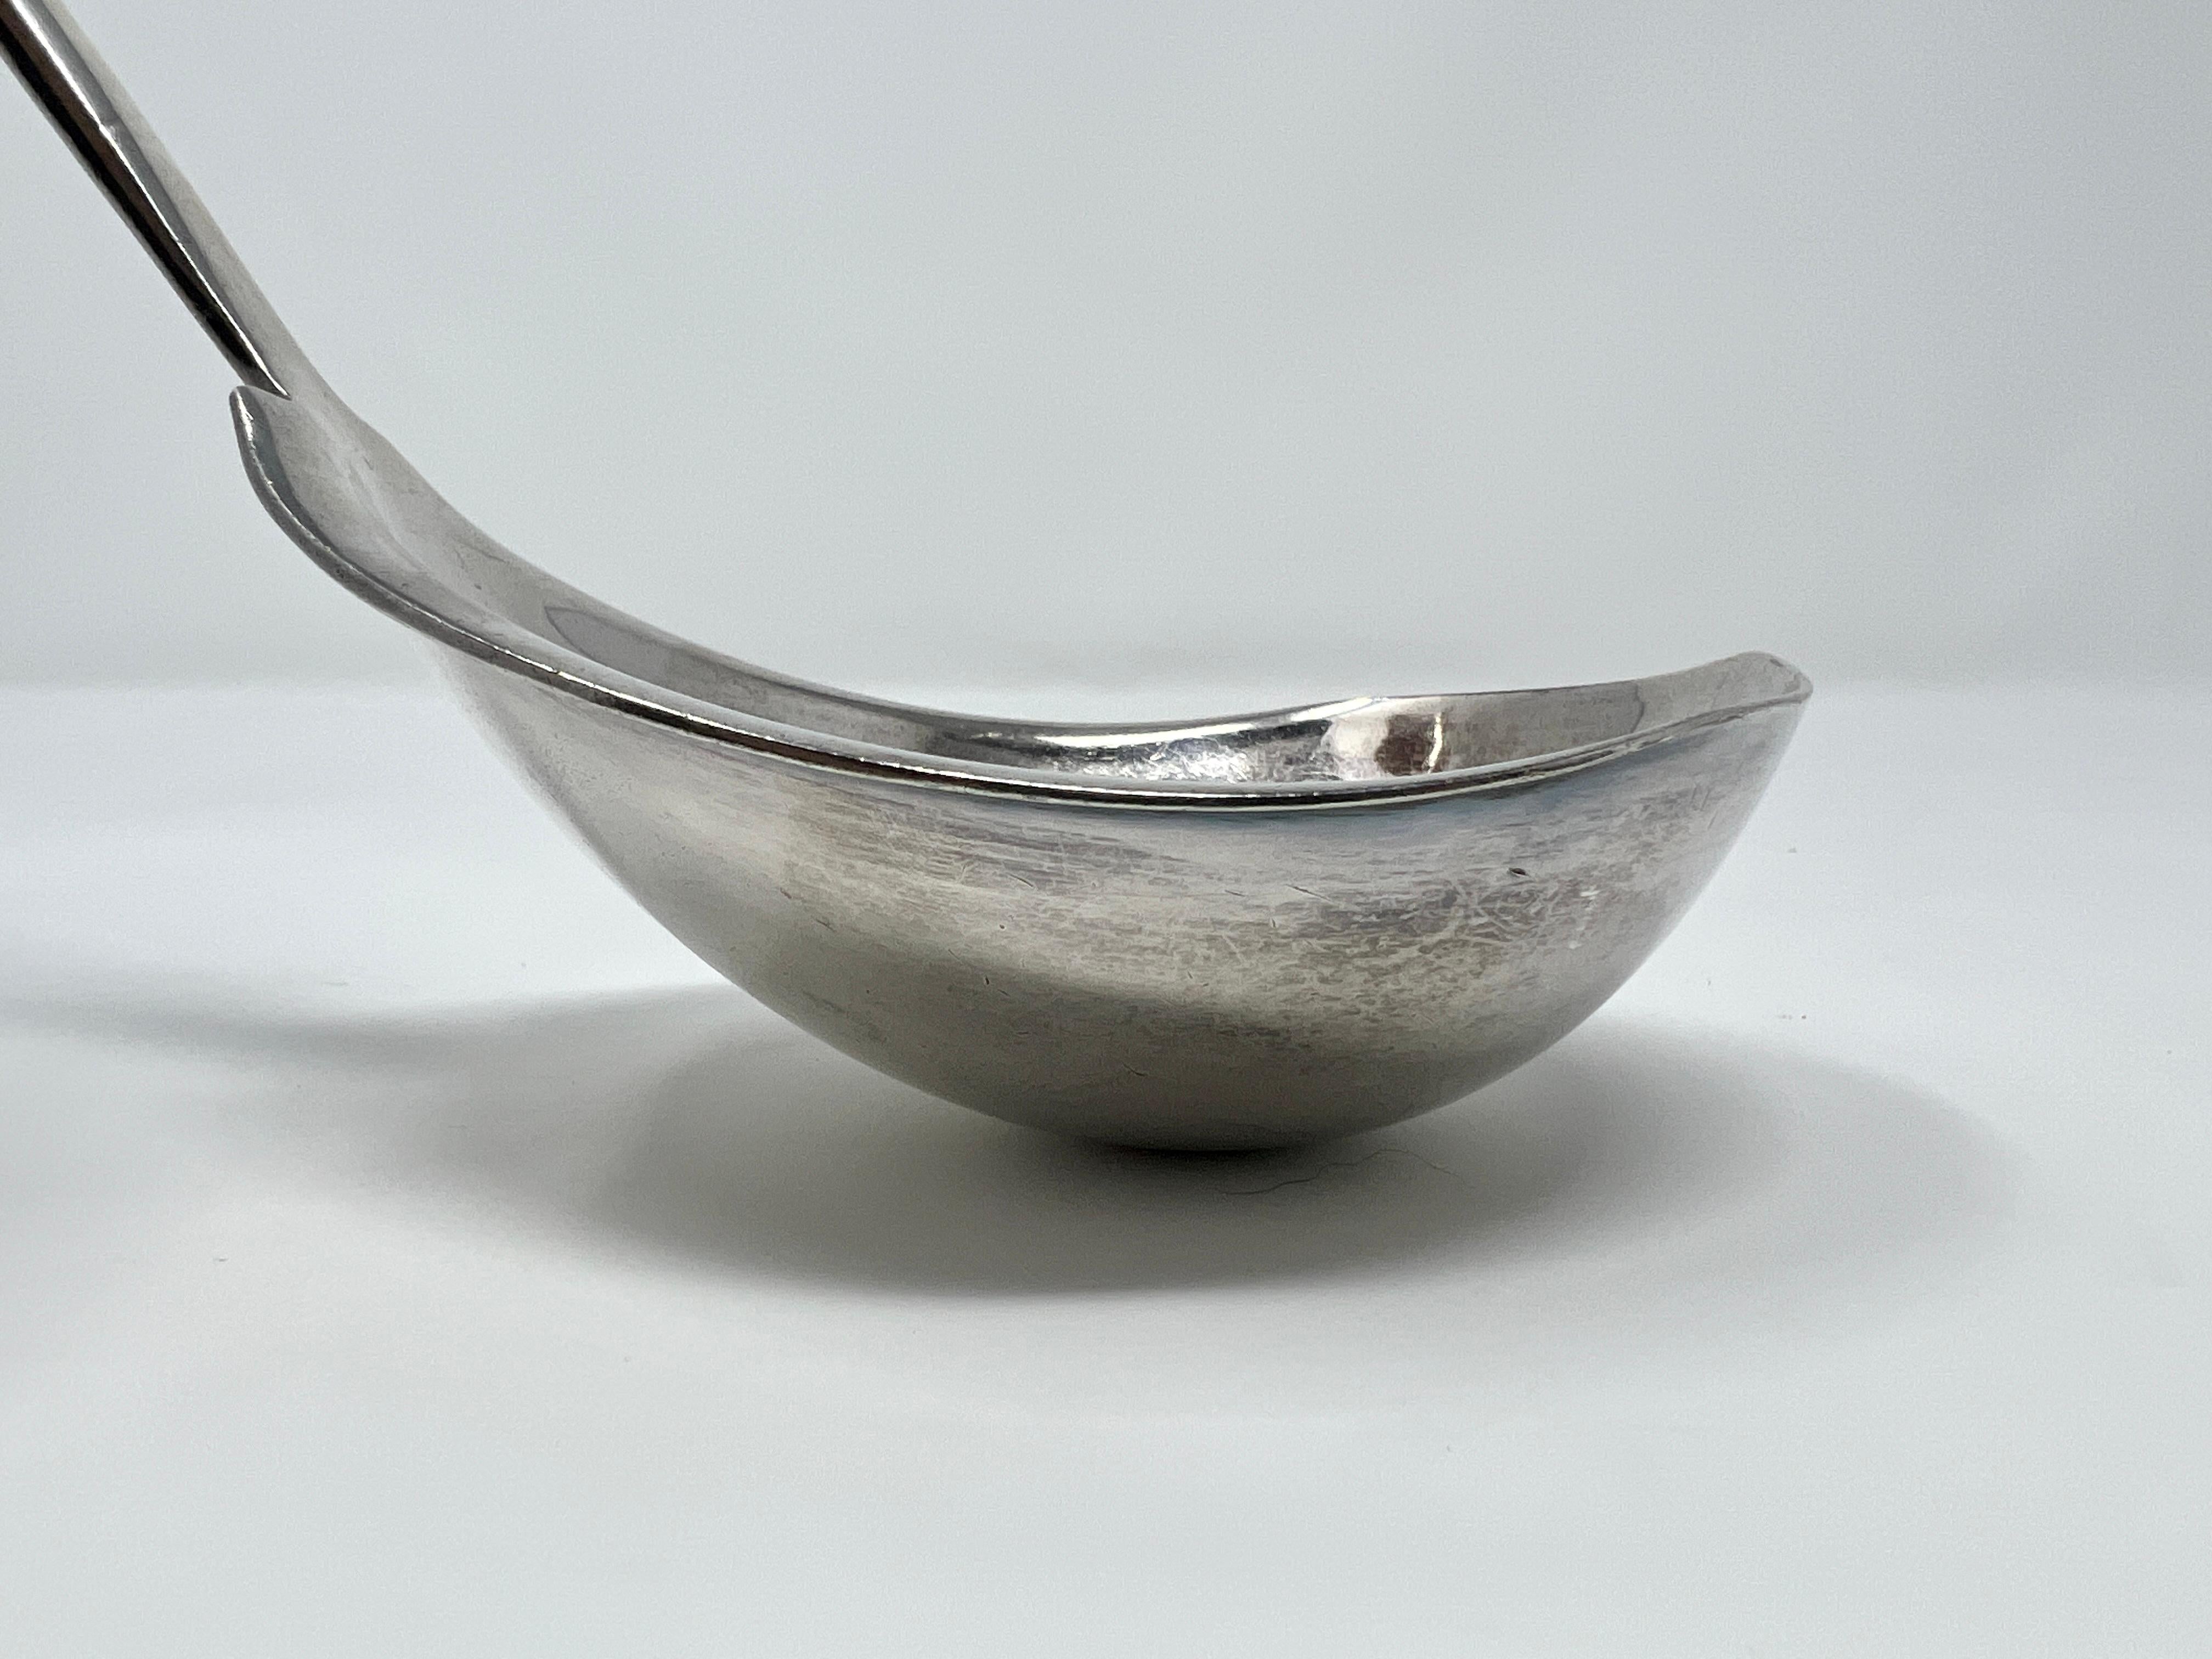 Antique silver plate ladle that would make a great gift for anyone!